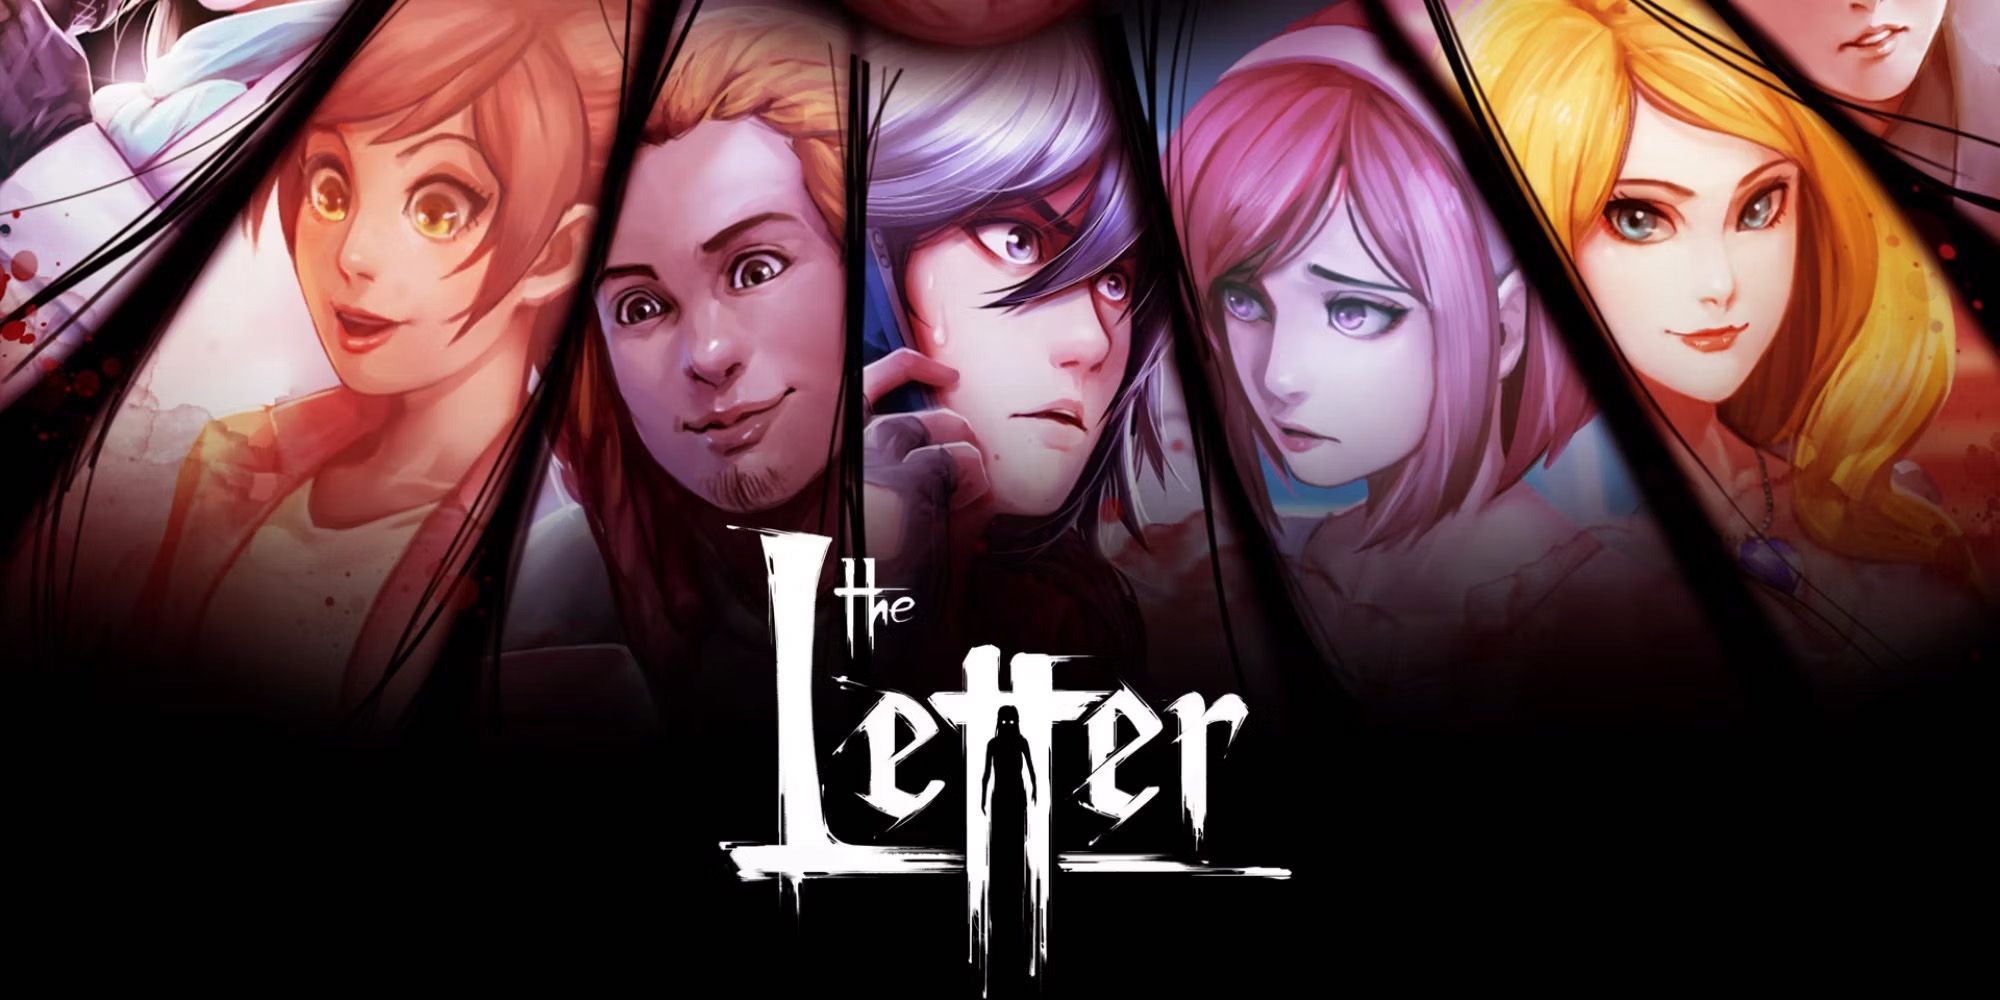  The Letter - Fractured Portraits Of The Main Cast On A Black Background